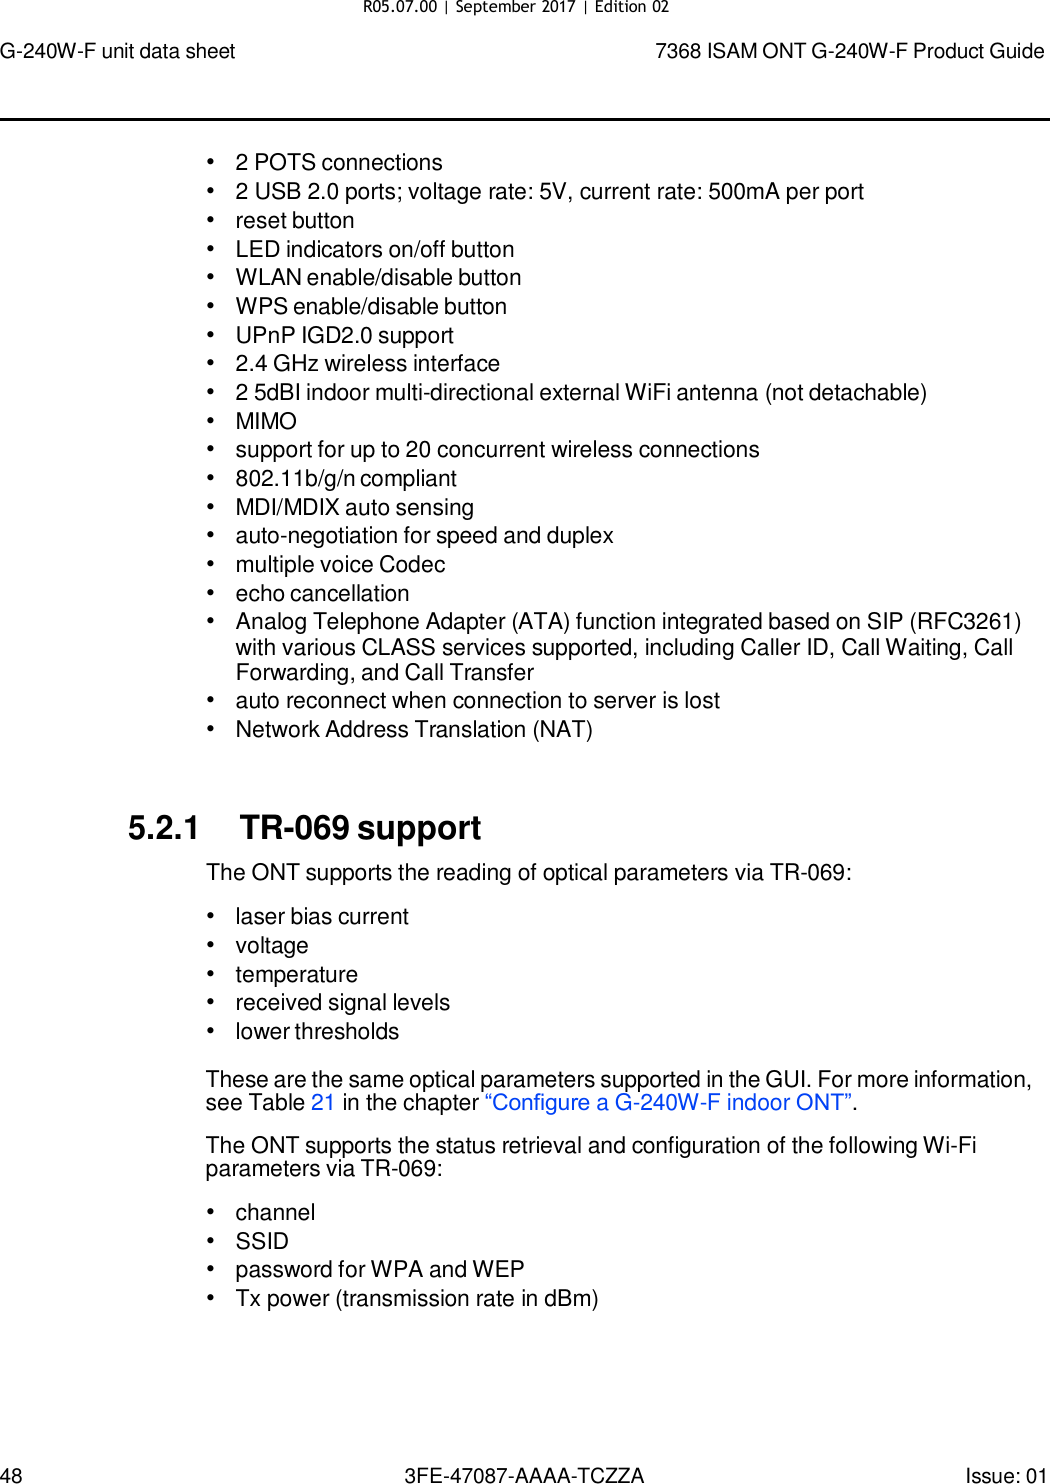 Page 45 of Nokia Bell G240WFV2 7368 ISAM GPON ONU User Manual 7368 ISAM ONT G 240W F Product Guide